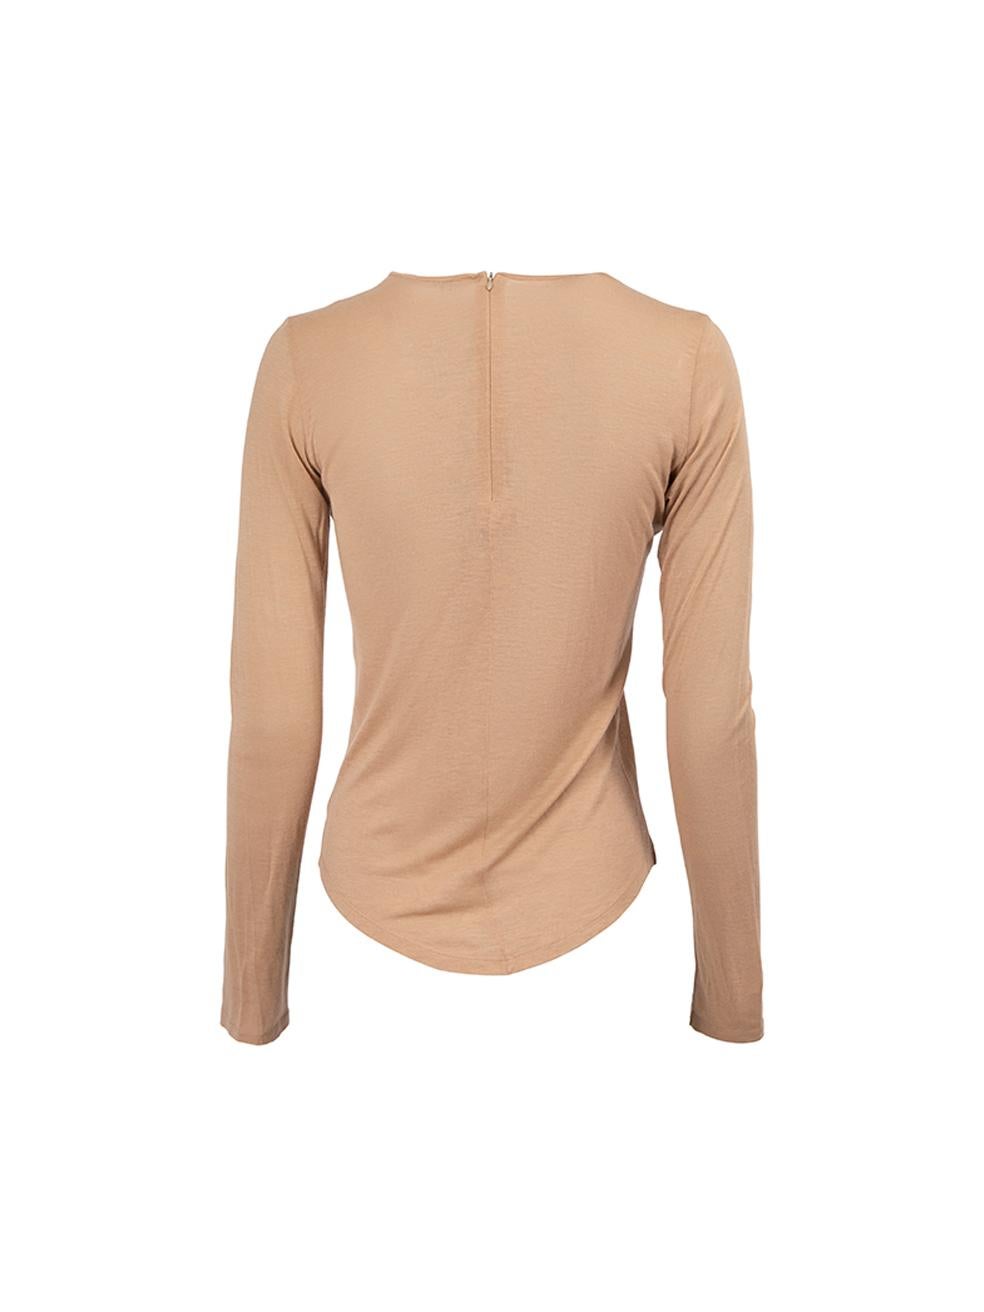 Nude Long Sleeves Top Size XS In Good Condition For Sale In London, GB